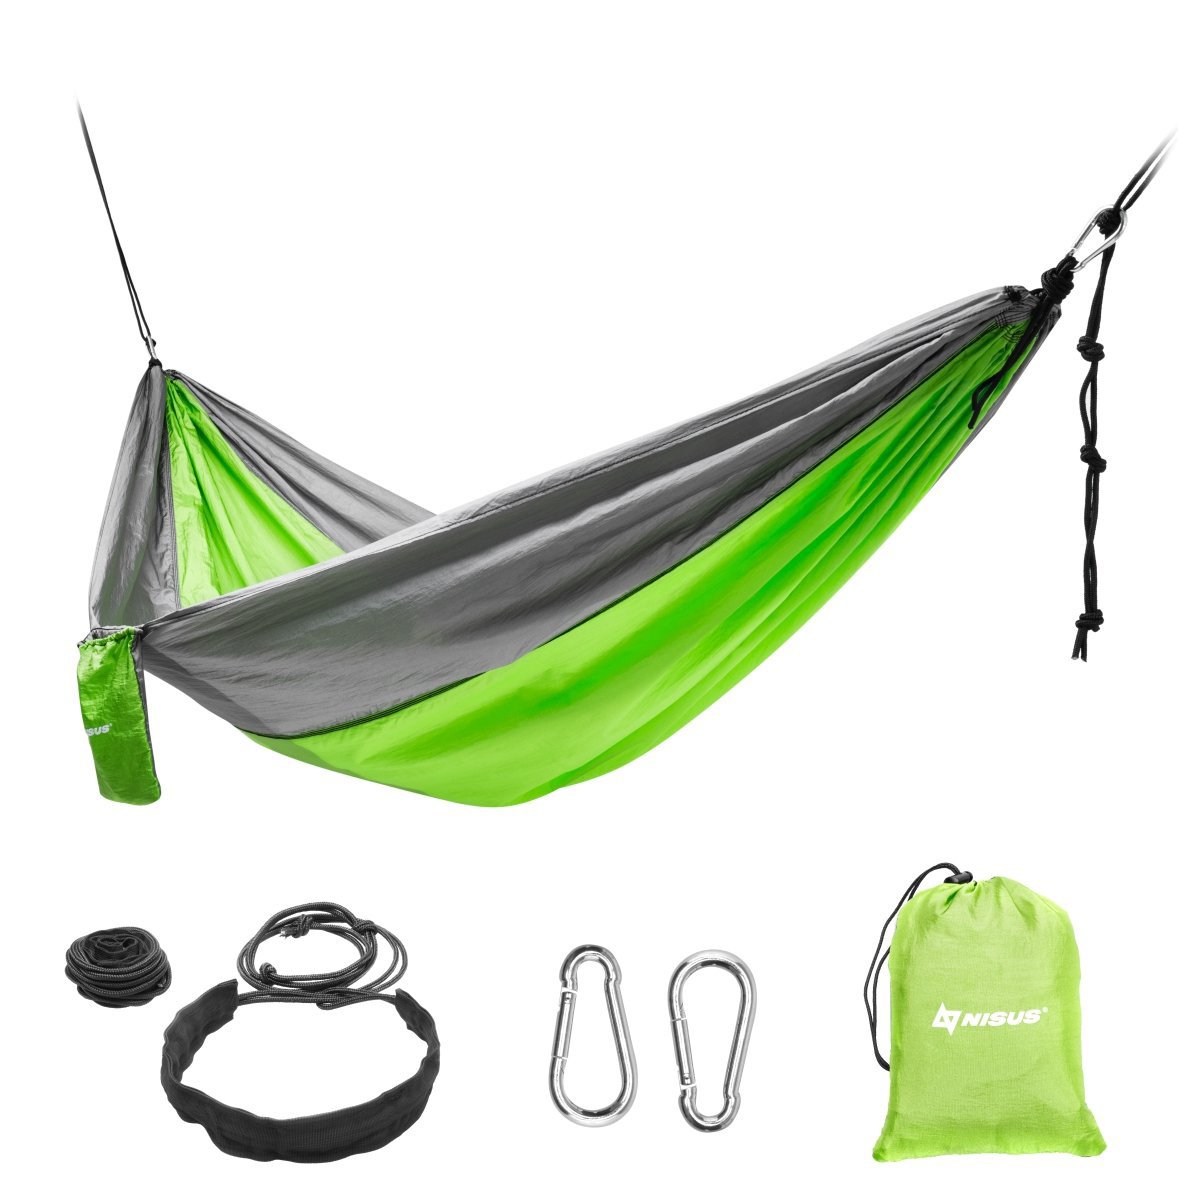 Nisus green camping hammock with a carry bag and ropes